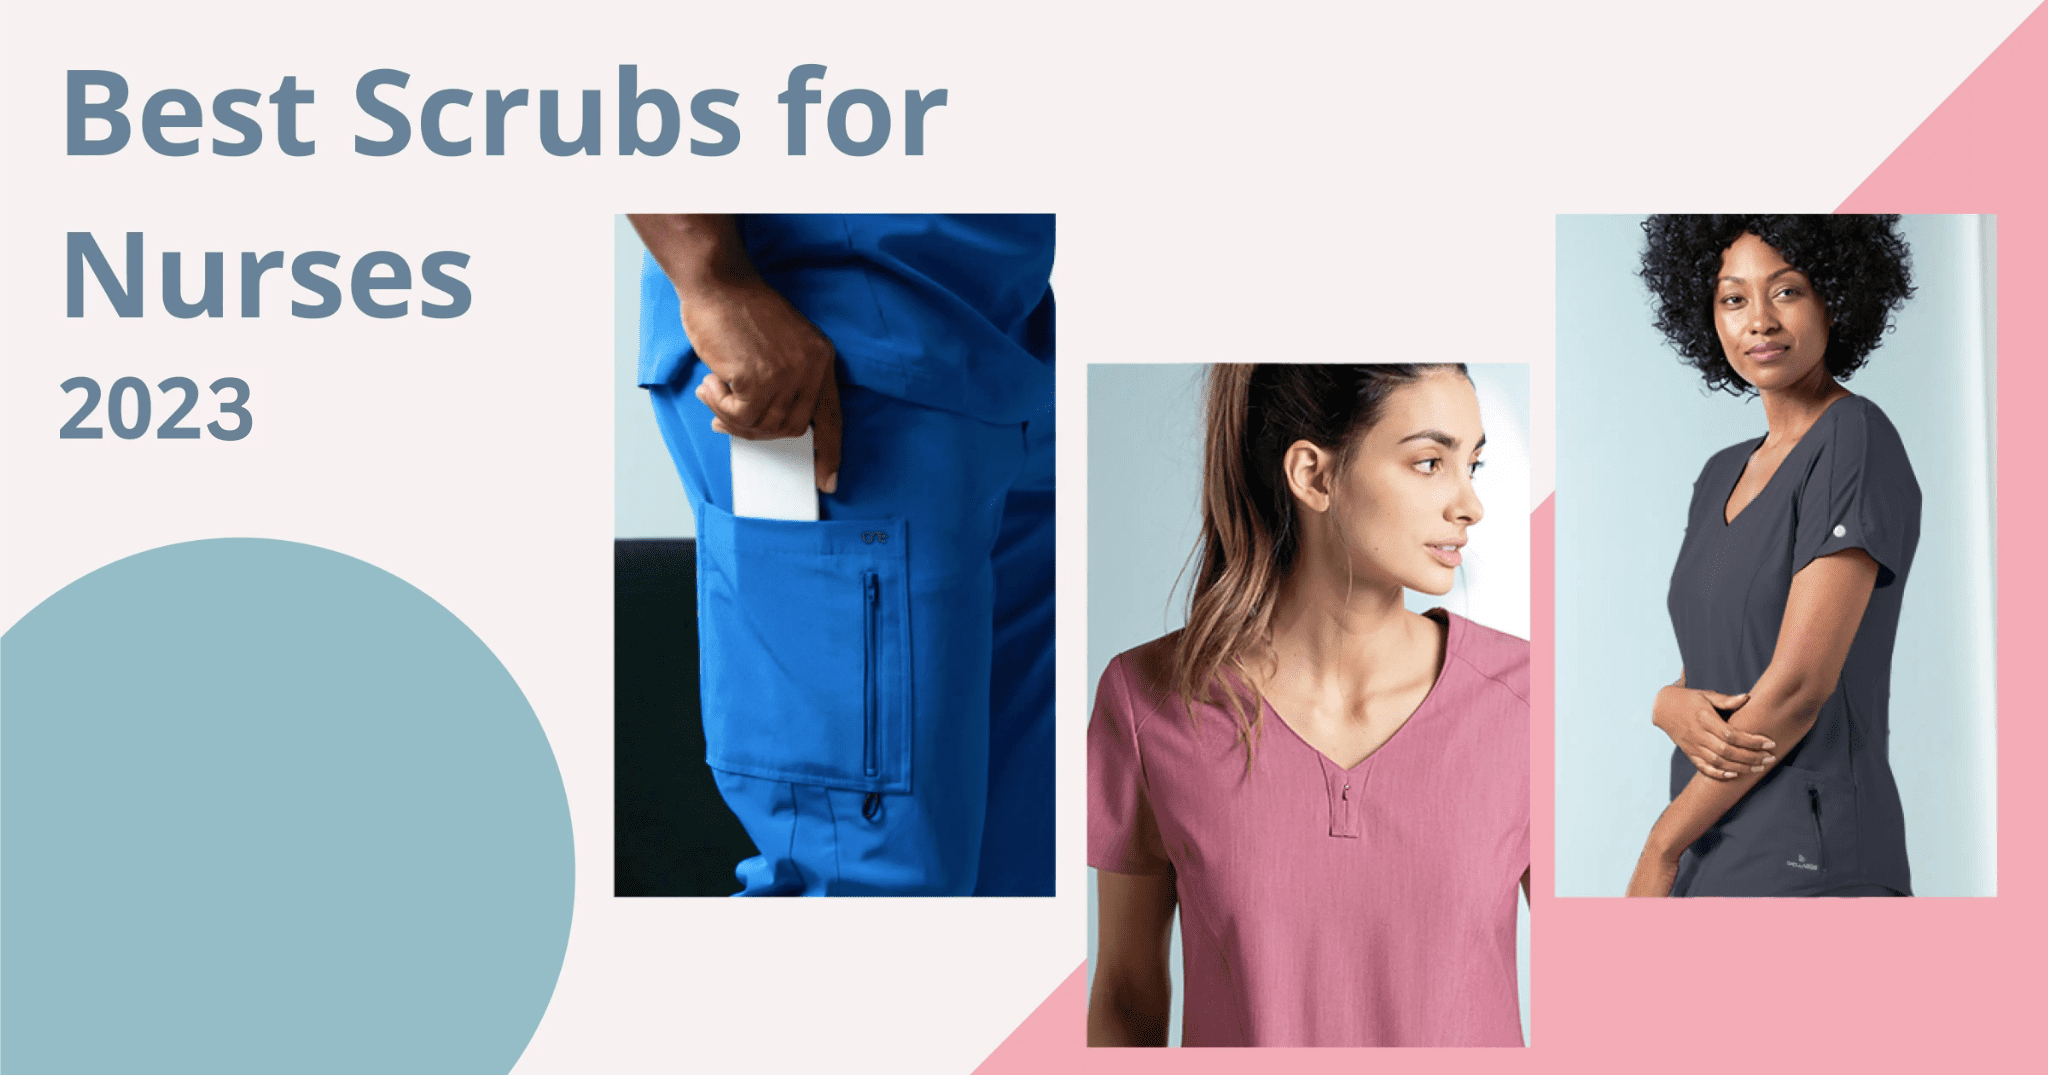 High-Quality Jogger Style Blue Medical Scrubs Like Figs & Cherokee